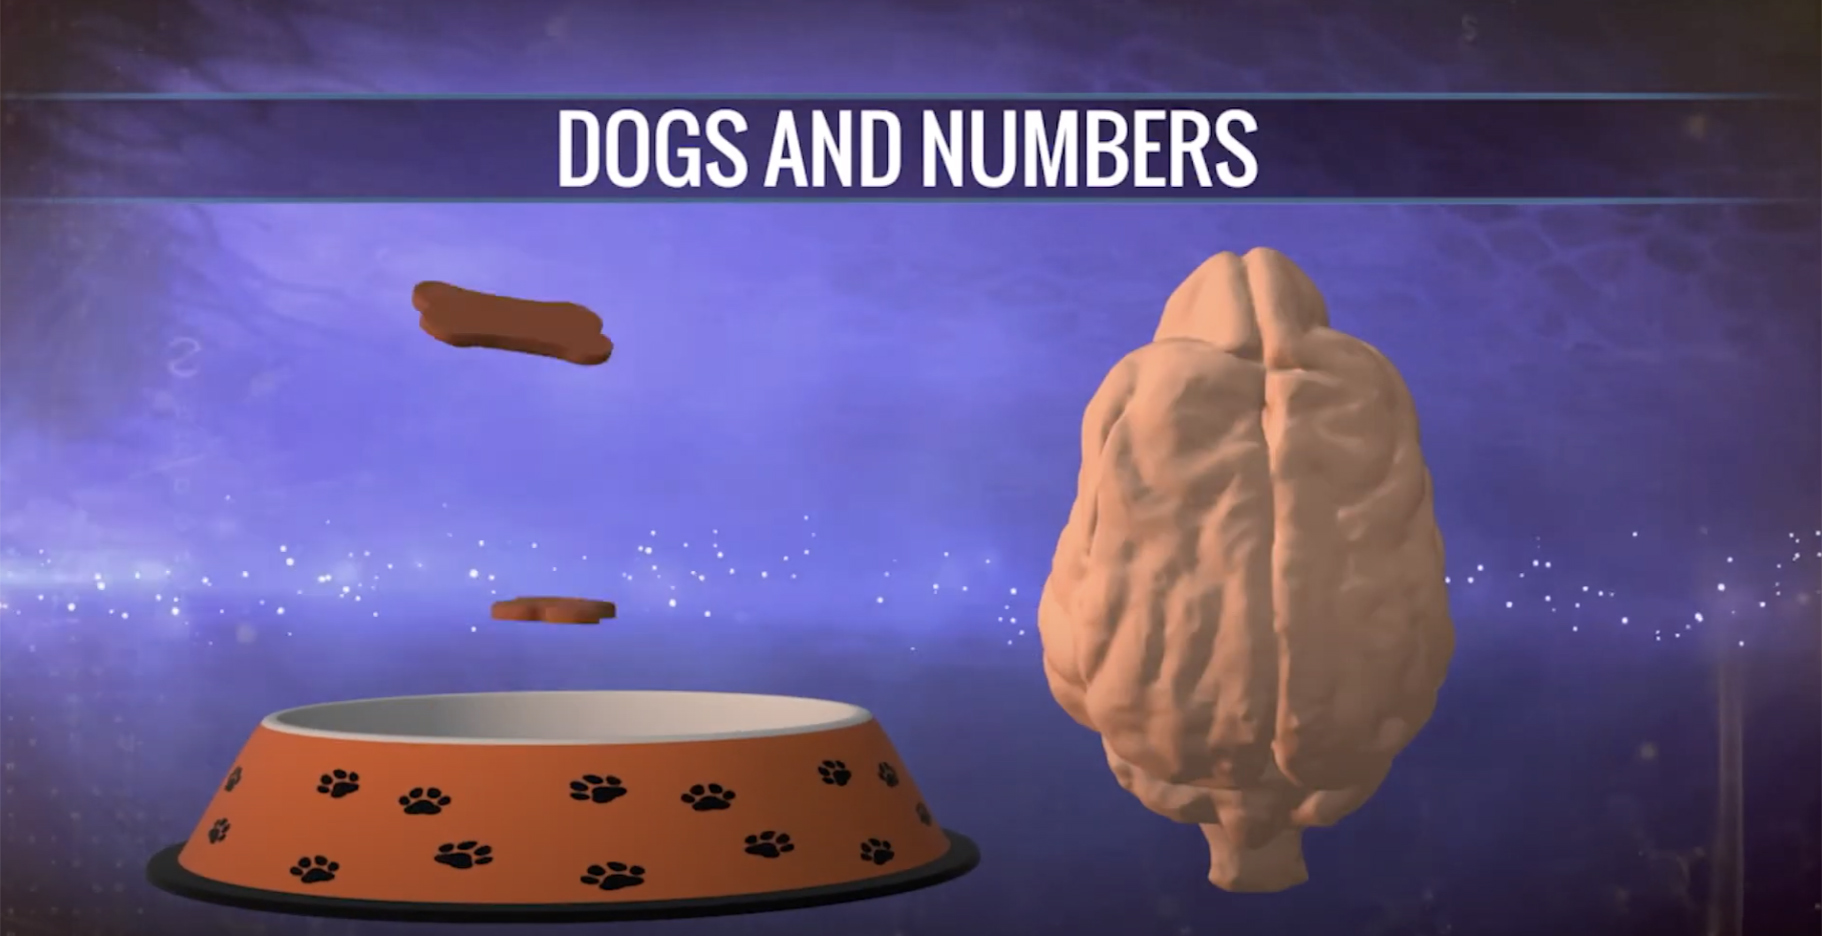 What has been Learned from Dog Neuroscience